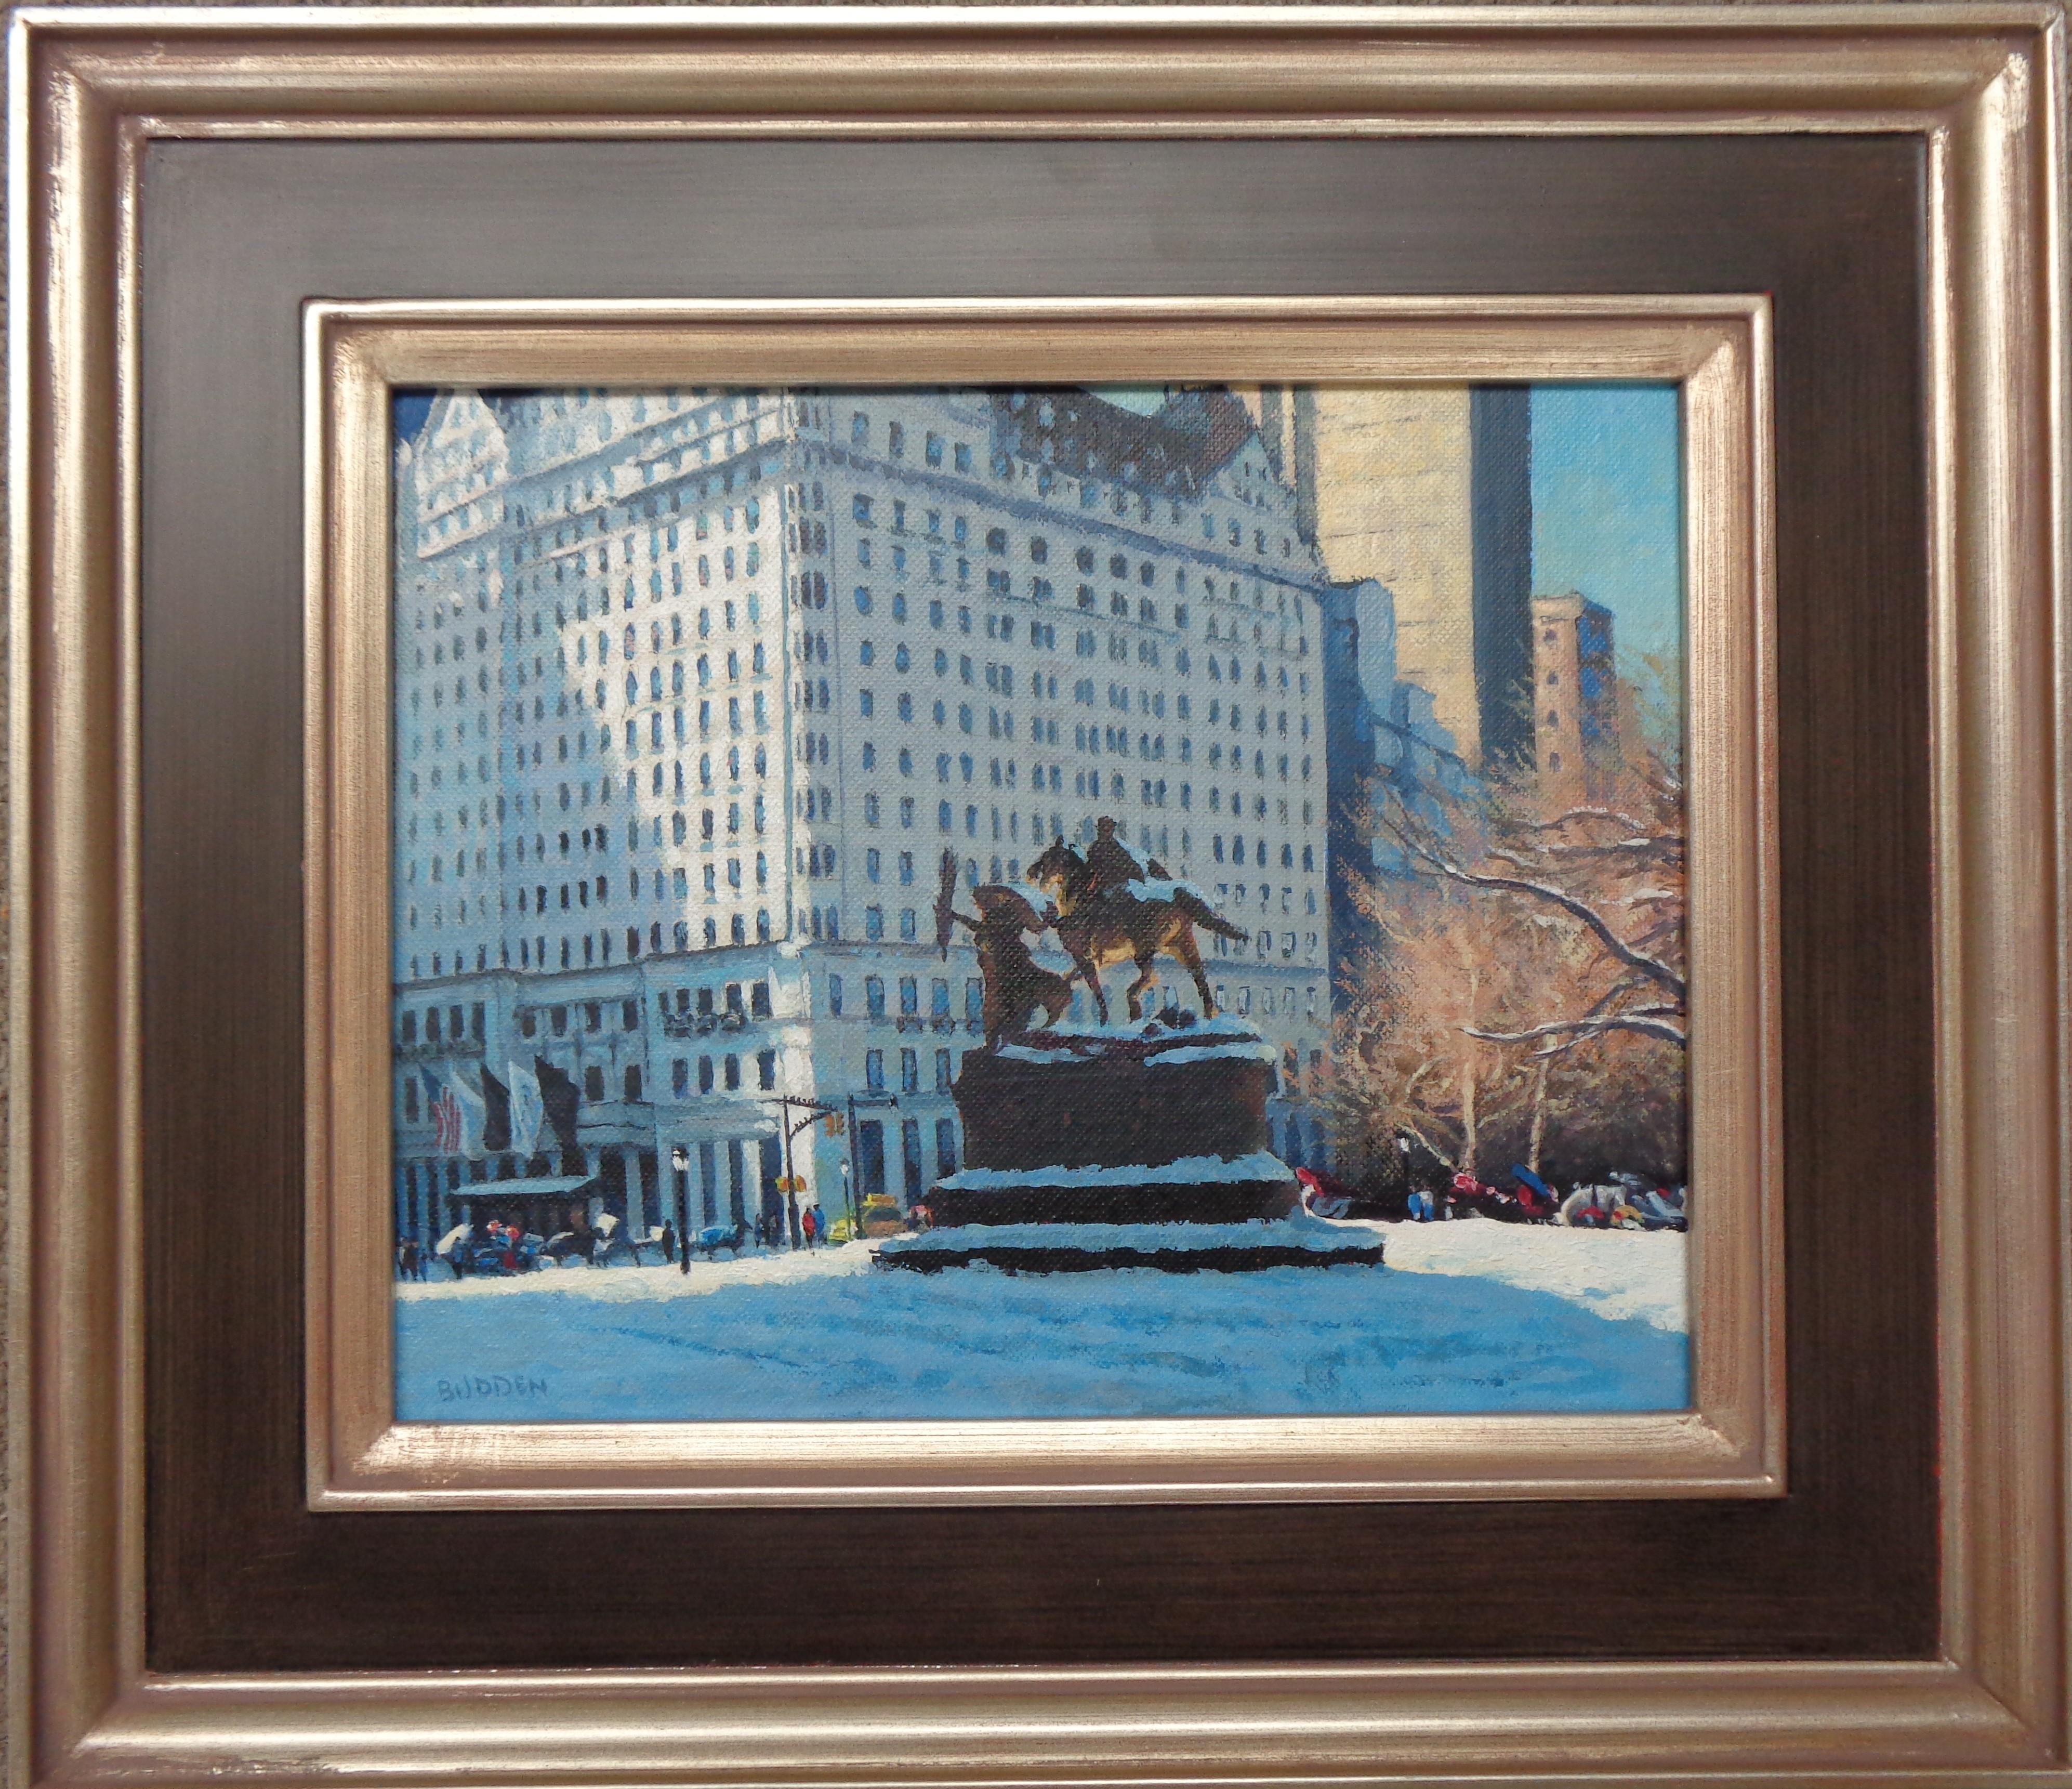  Central Park Grand Army Plaza
oil/panel
8 x 10 image unframed 12.63 x 14.5 framed
 is an oil painting  on canvas panel by award winning contemporary artist Michael Budden. This is one of my favorite areas in NYC to wonder and look for images that